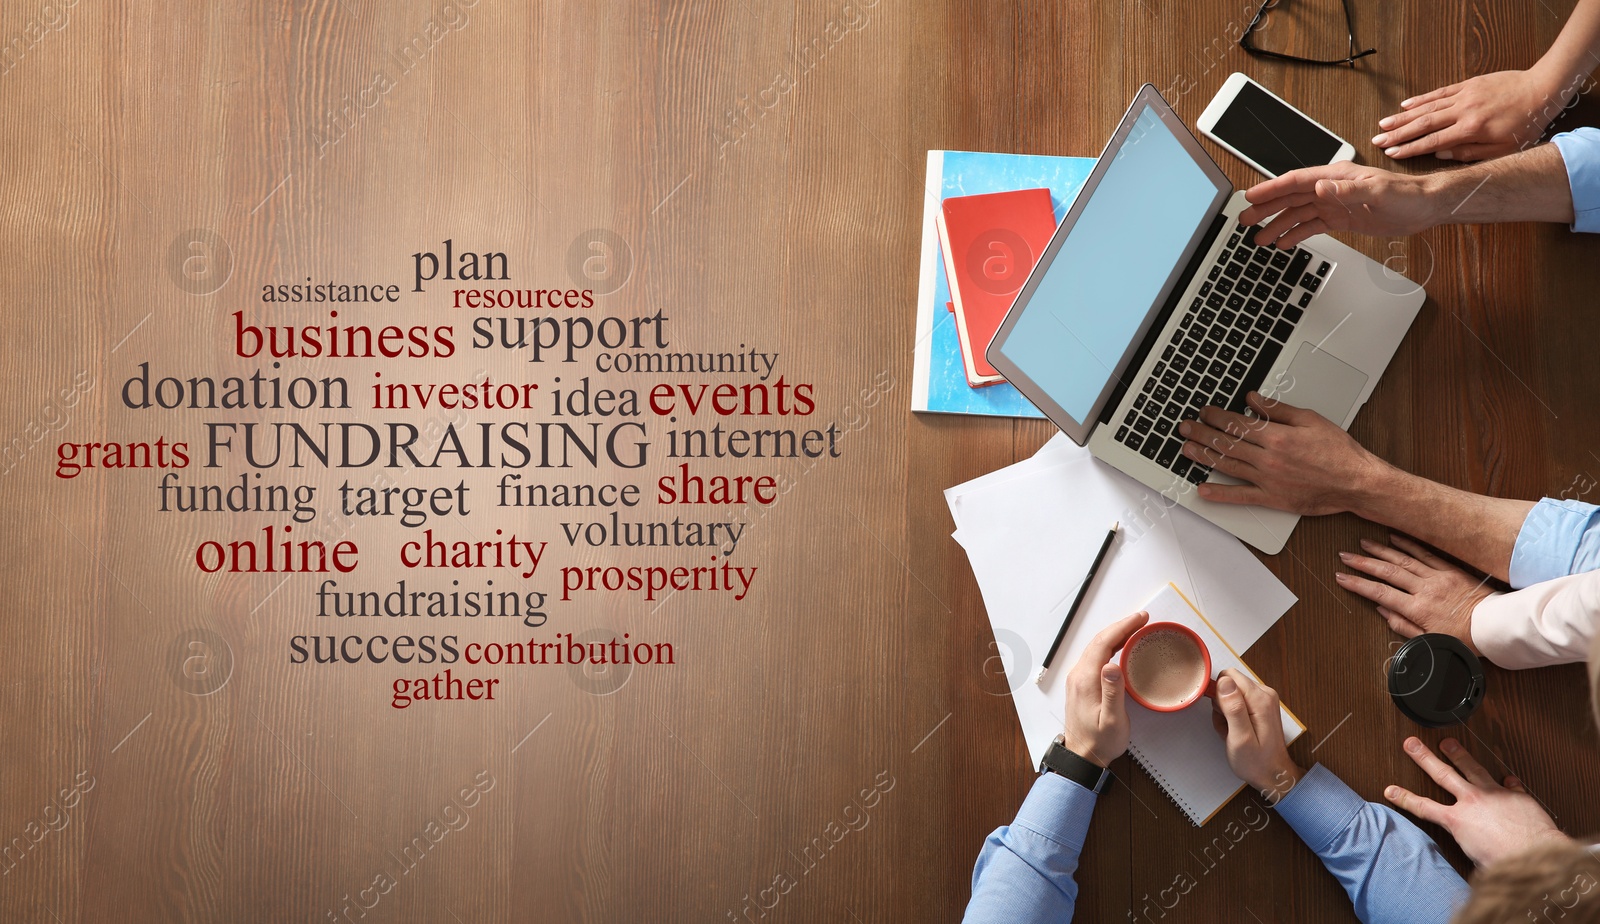 Image of People working together at wooden table, top view. Word cloud with fundraising themed terms